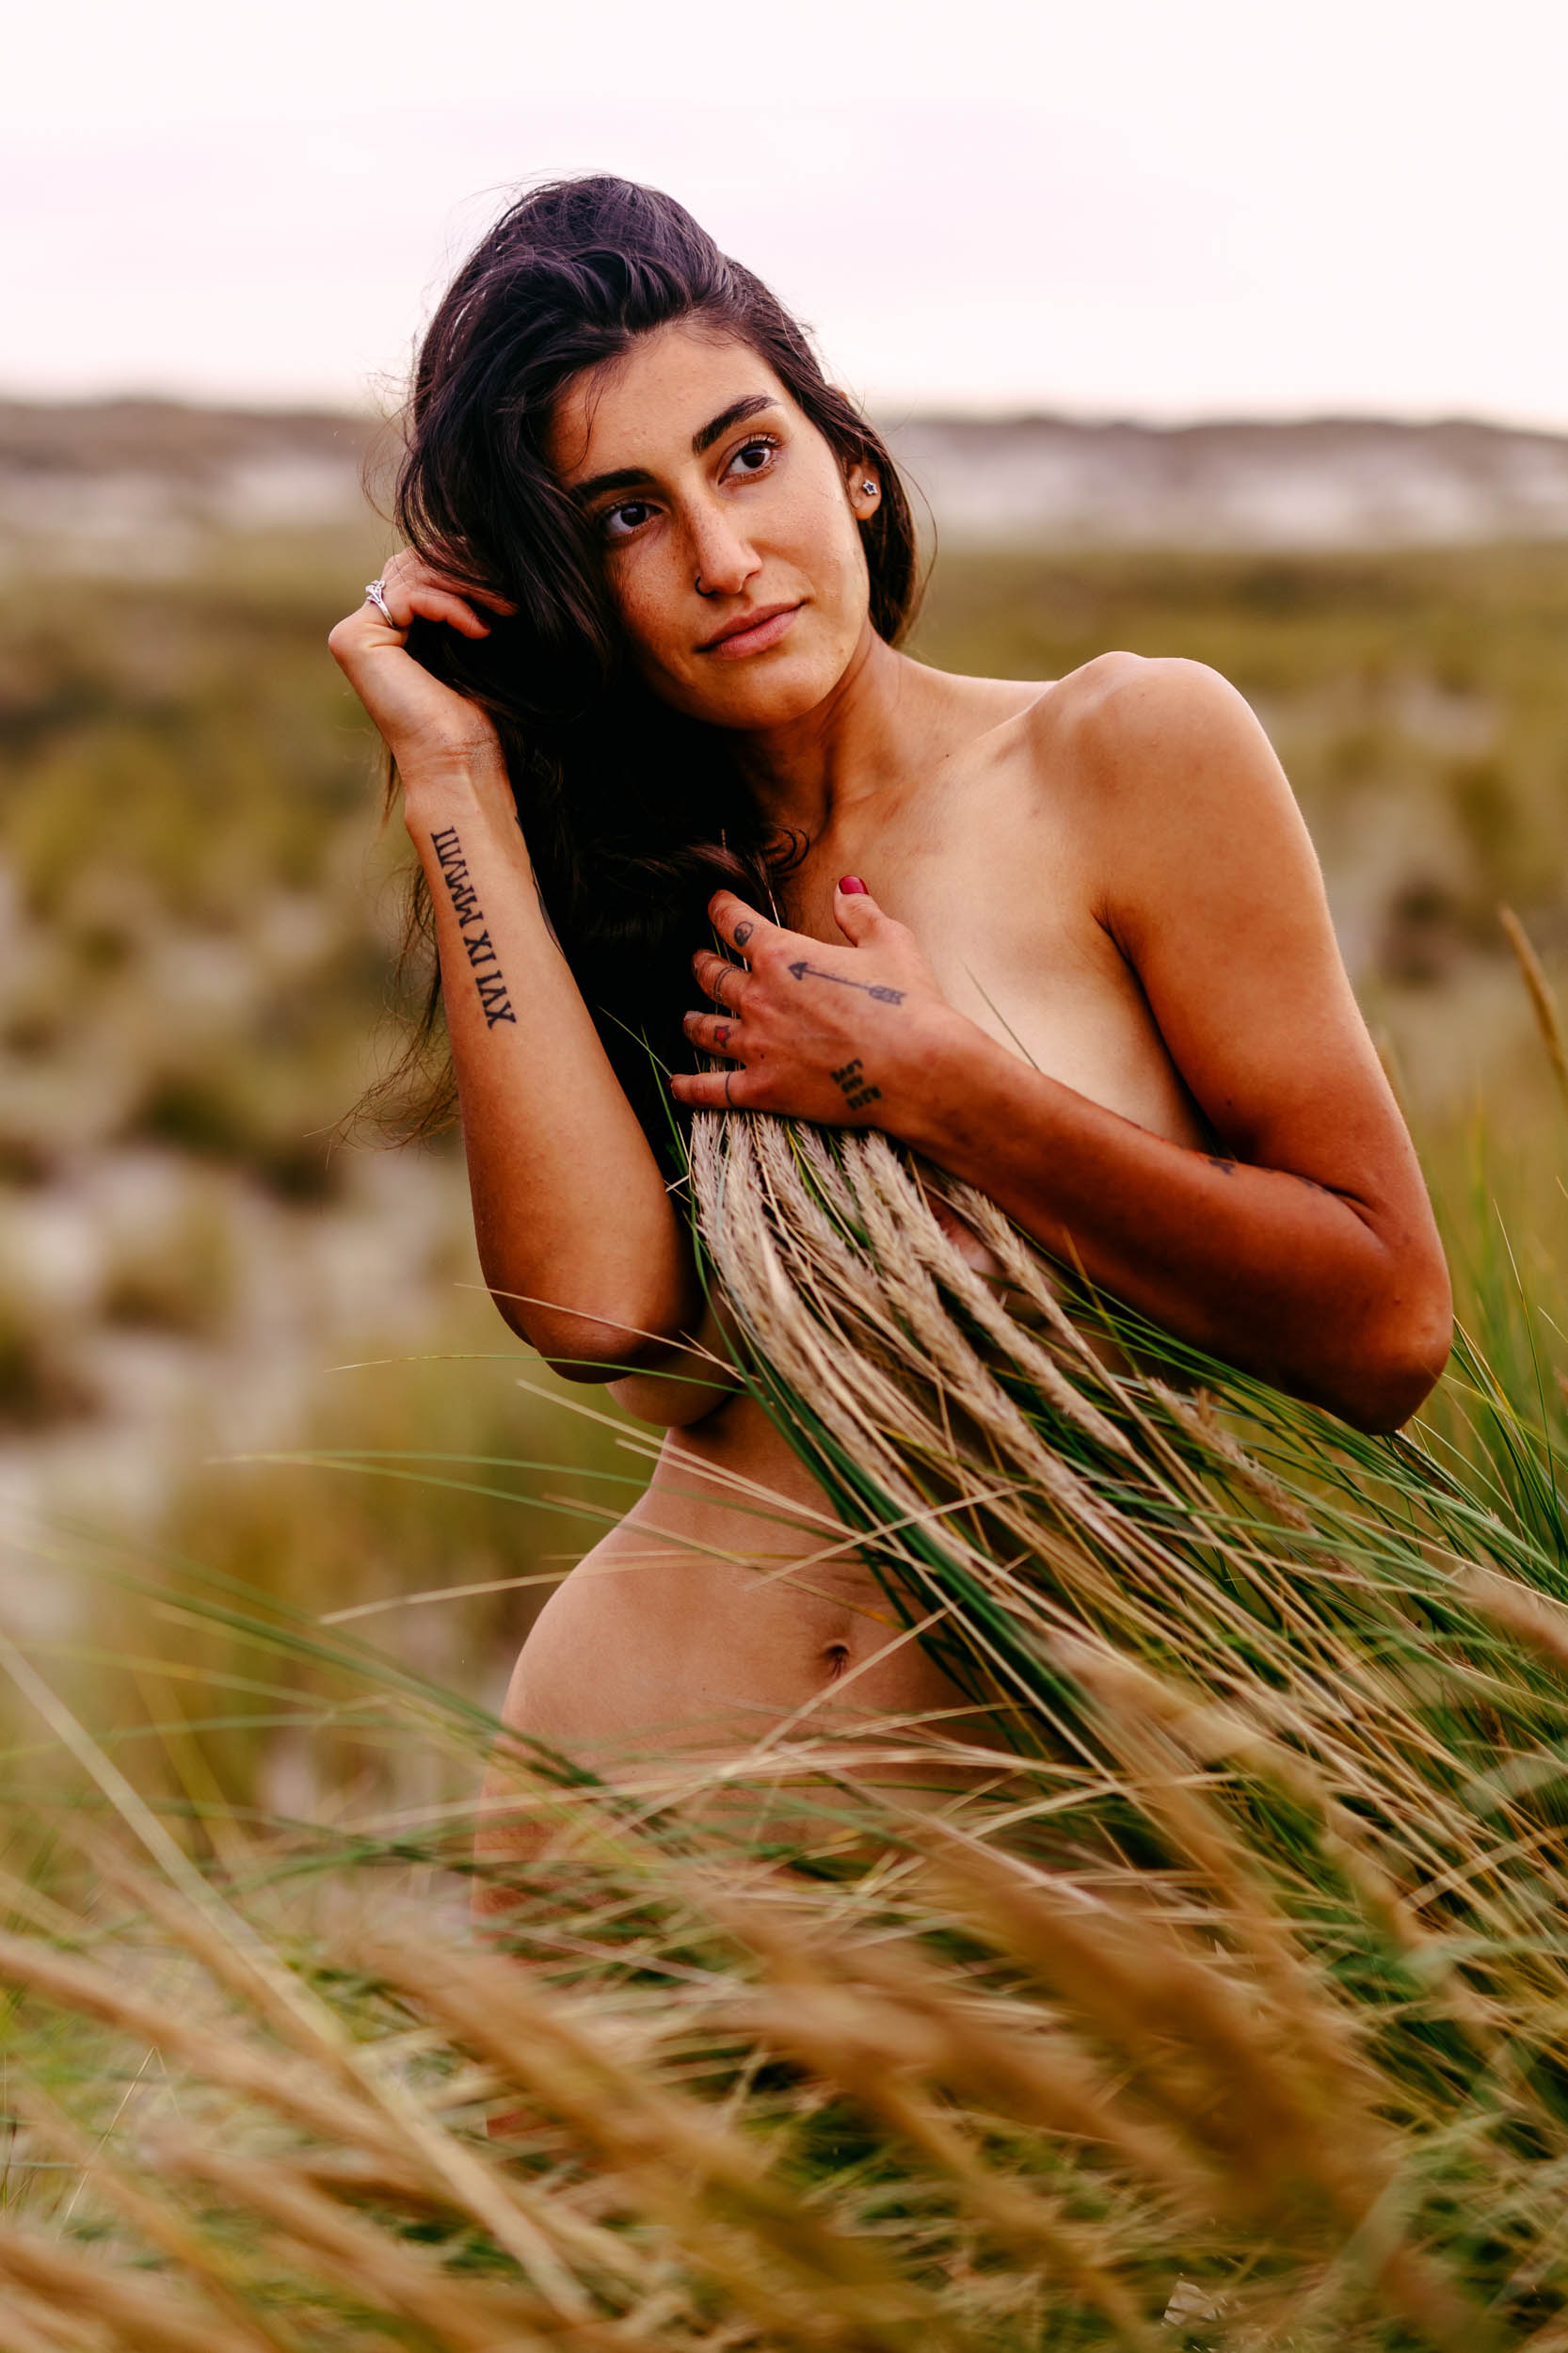 A naked woman poses strikingly in the tall grass during a captivating beach photo shoot.